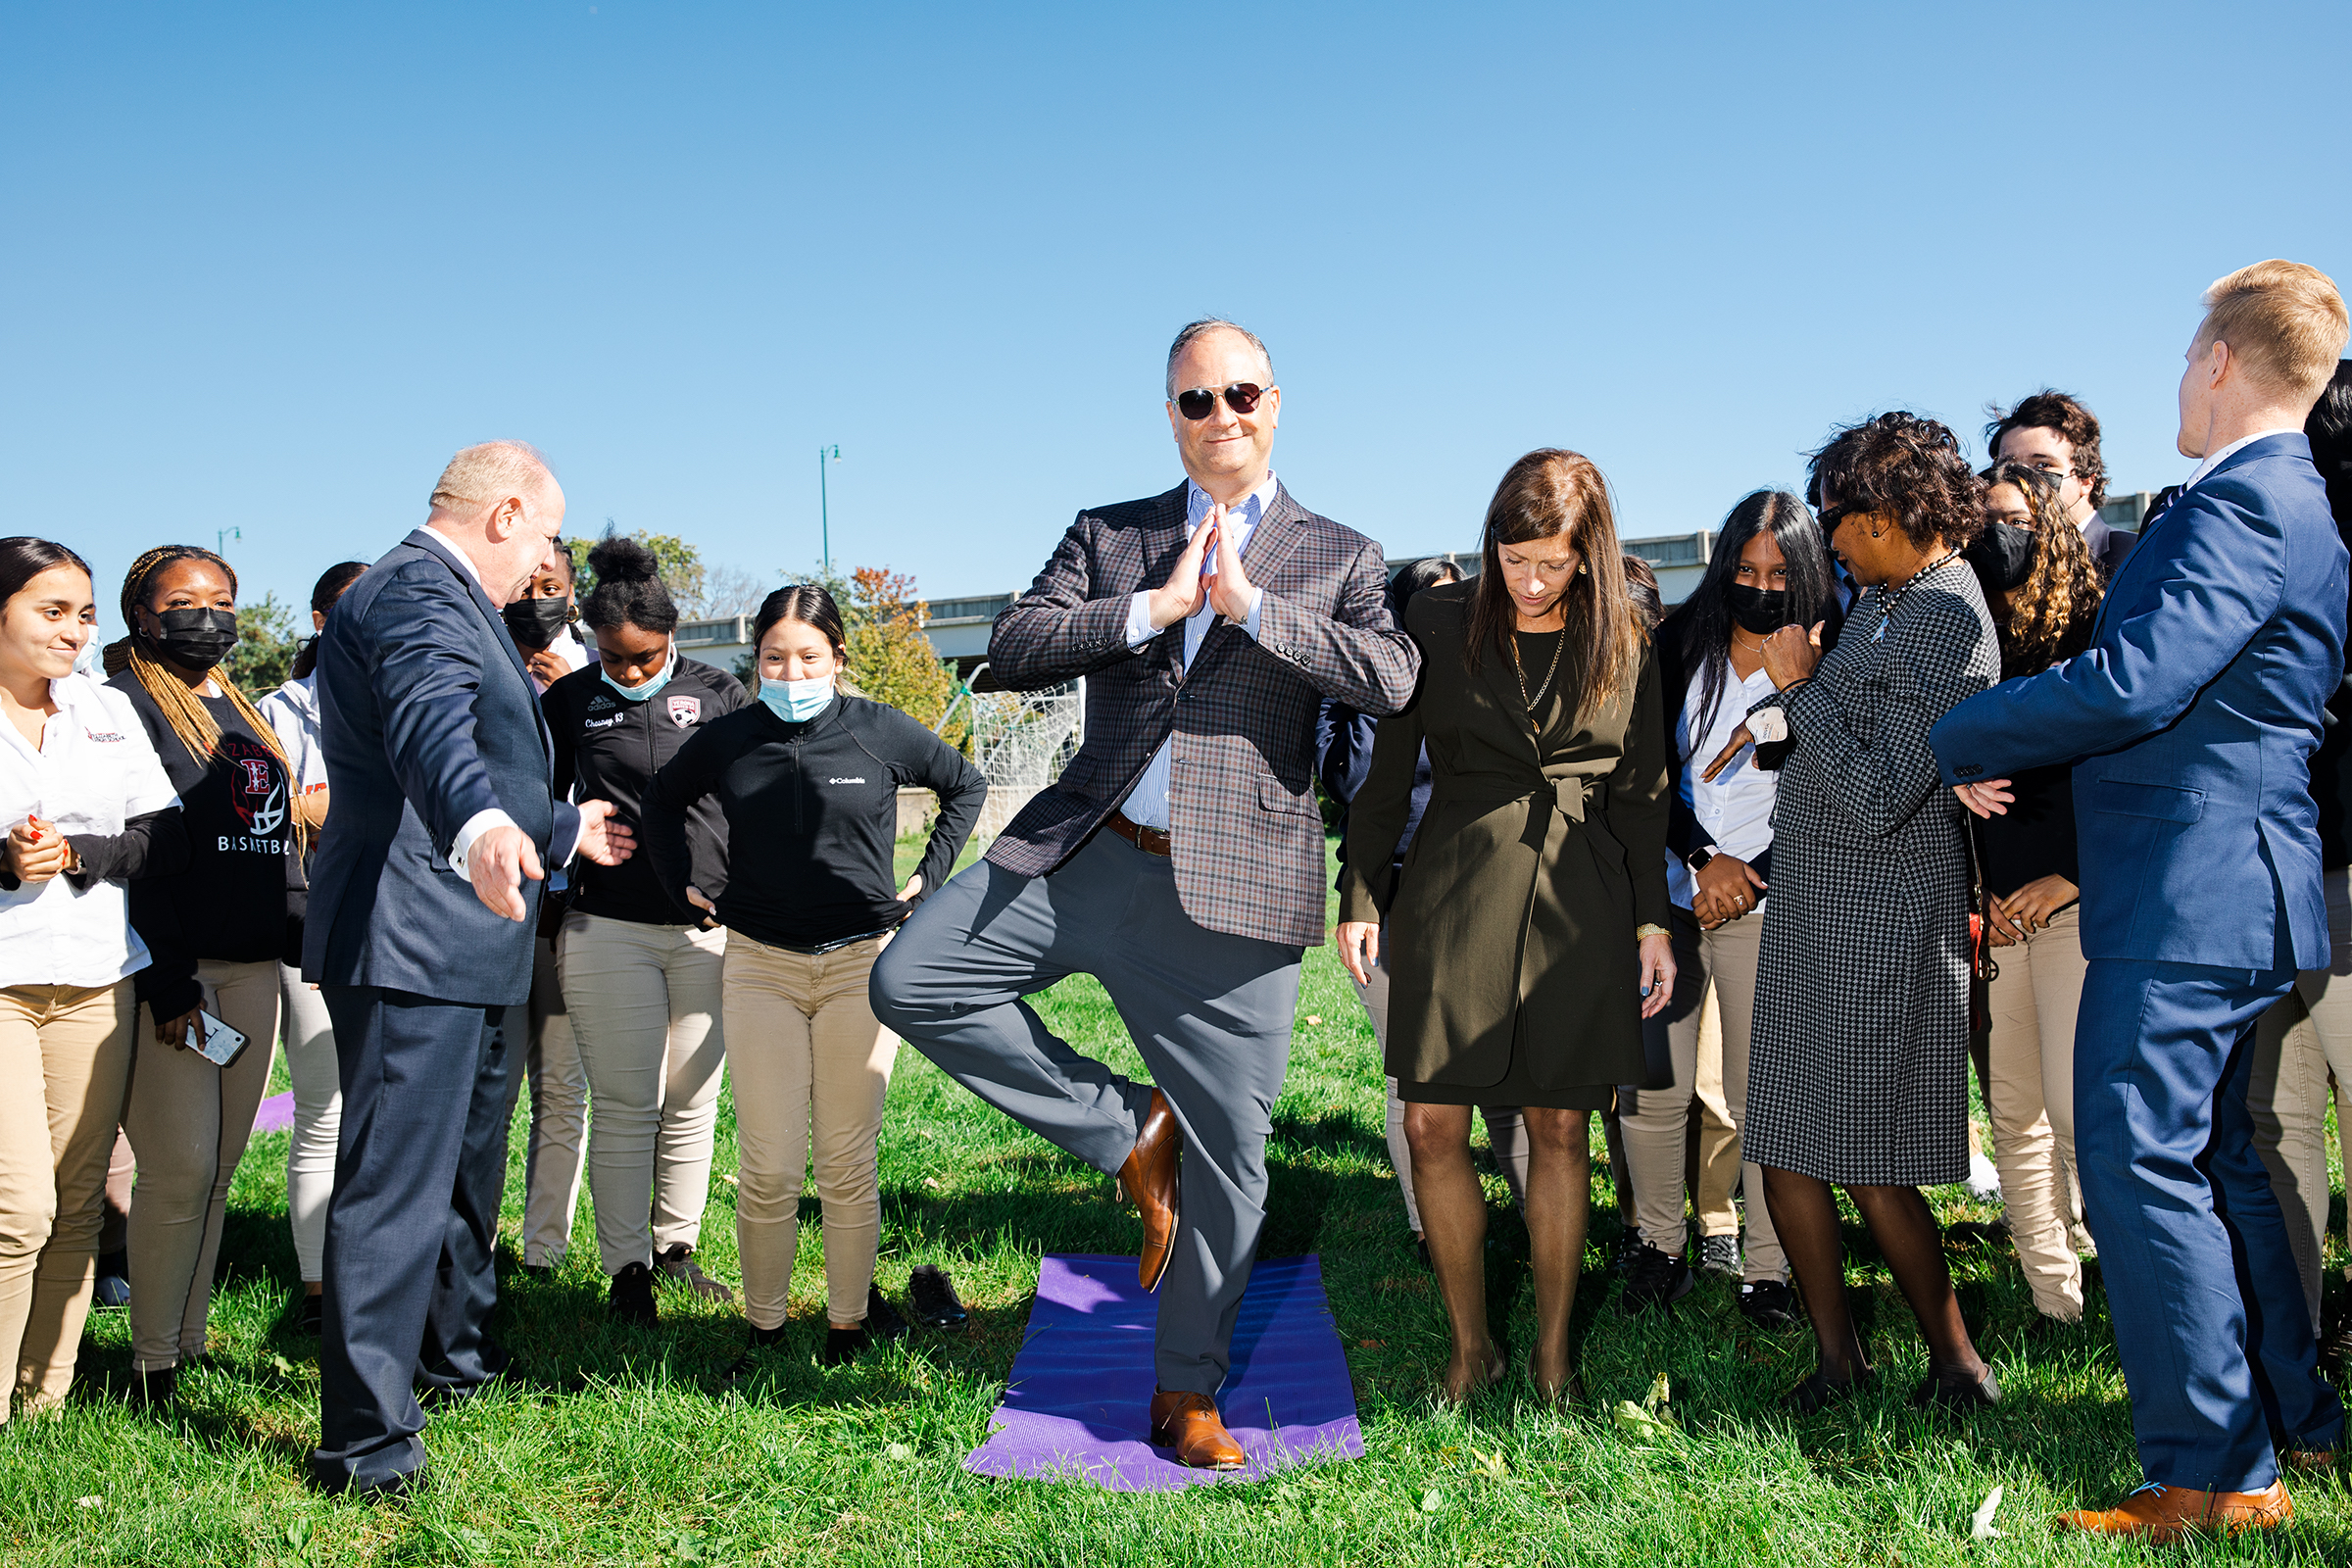 Second Gentleman Doug Emhoff, the husband of Vice President Kamala Harris, practices his tree pose with a yoga class during a visit to New Jersey on Oct. 19.